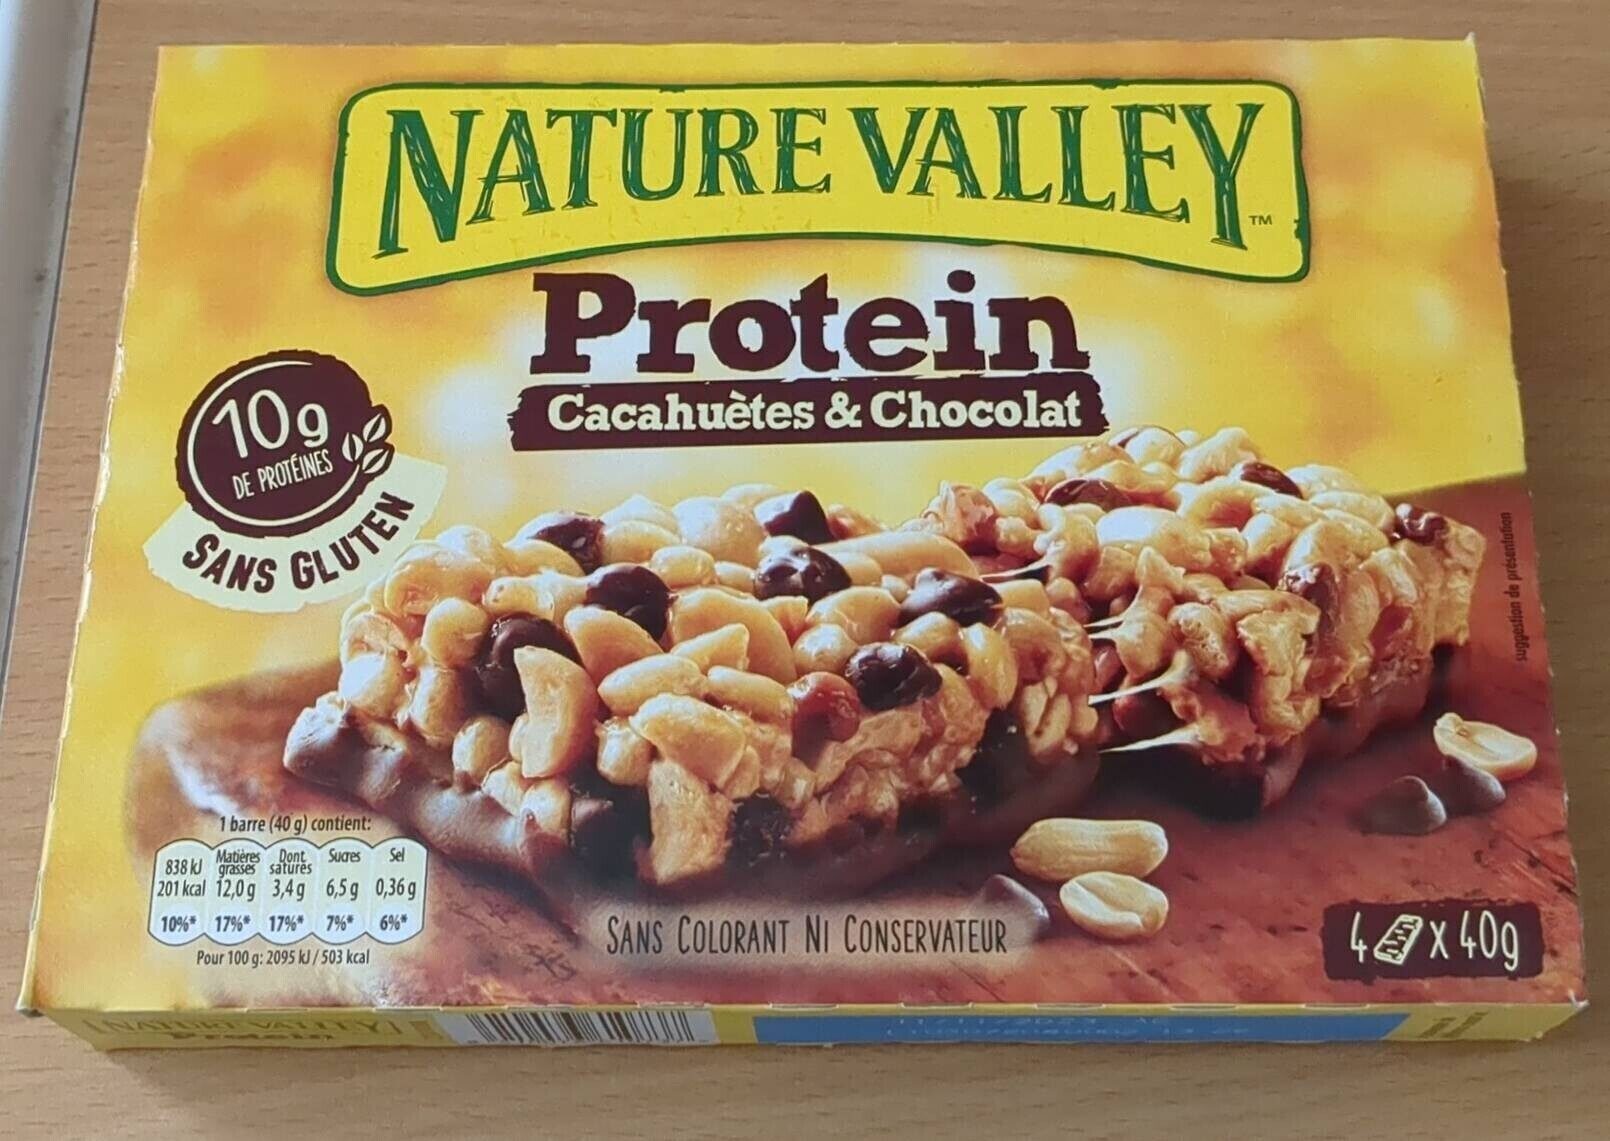 Protein Cacahuetes & Chocolat - Produkt - fr